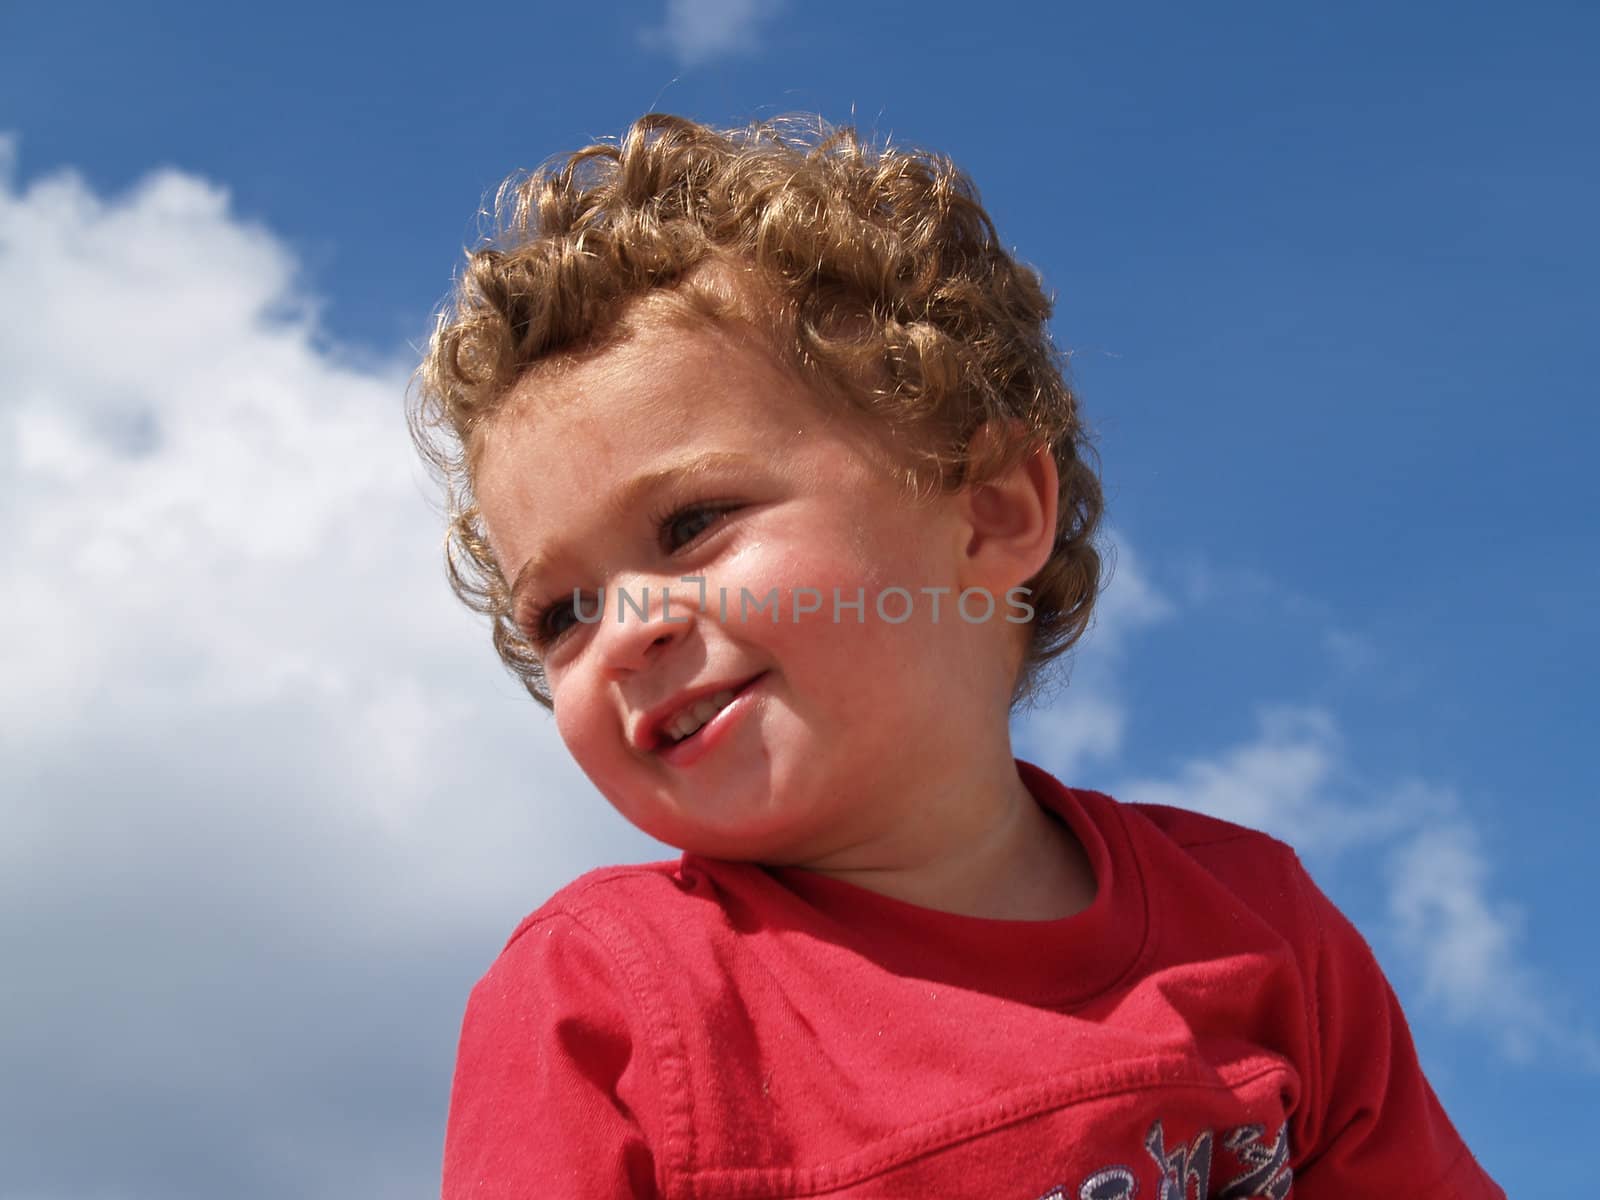 Young boy looking right under sky with white clouds.